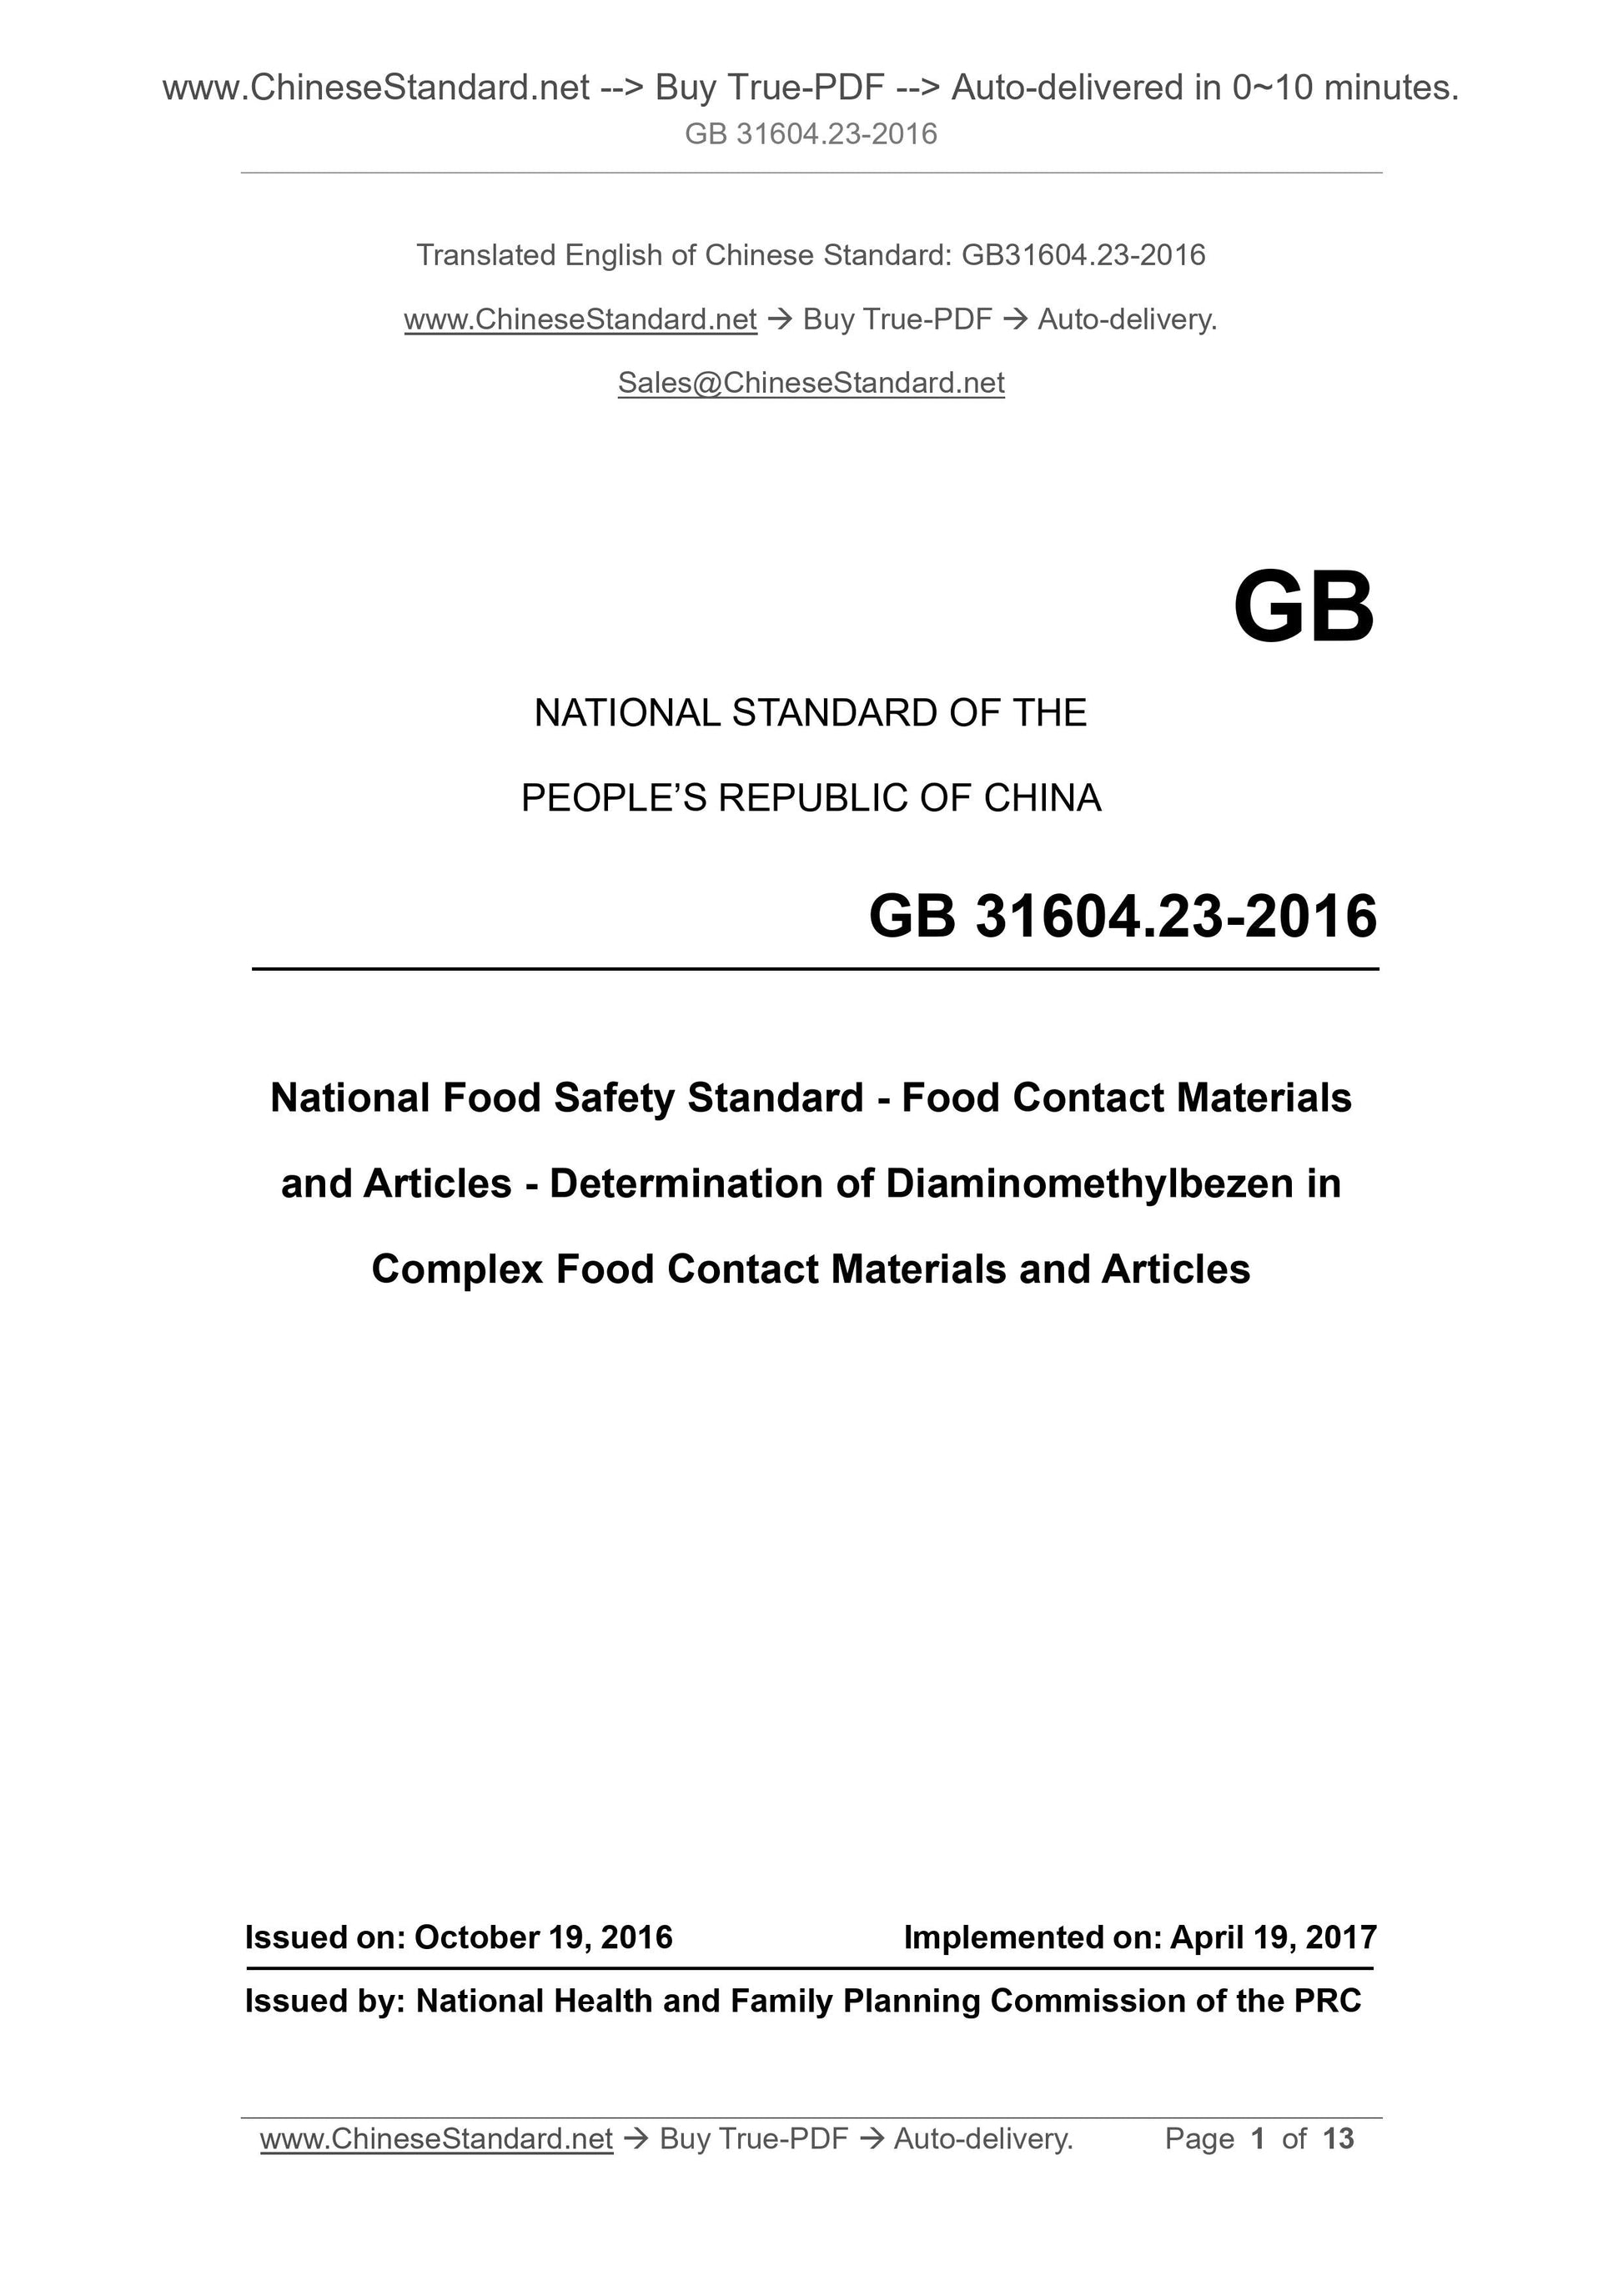 GB 31604.23-2016 Page 1